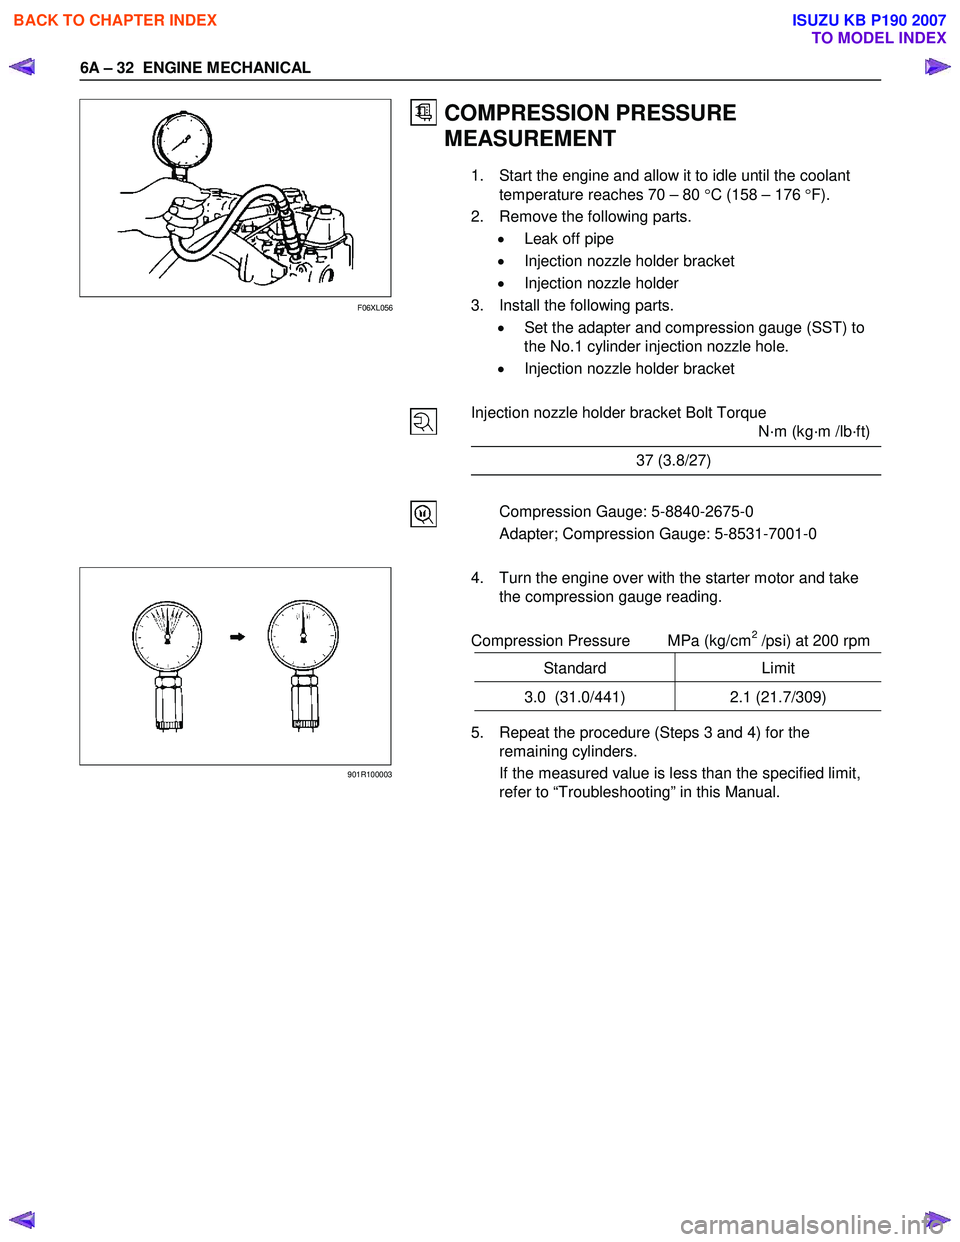 ISUZU KB P190 2007  Workshop Owners Manual 6A – 32  ENGINE MECHANICAL 
 
 
  
 
 
 
 
 
 
 
 
 
 
 
 
 
 
 
 
 
 
 
 
 
 
 
 
 
 
 
 
 
 
 
 
 
 
 
 
  
 
COMPRESSION PRESSURE  
MEASUREMENT 
1.  Start the engine and allow it to idle until th